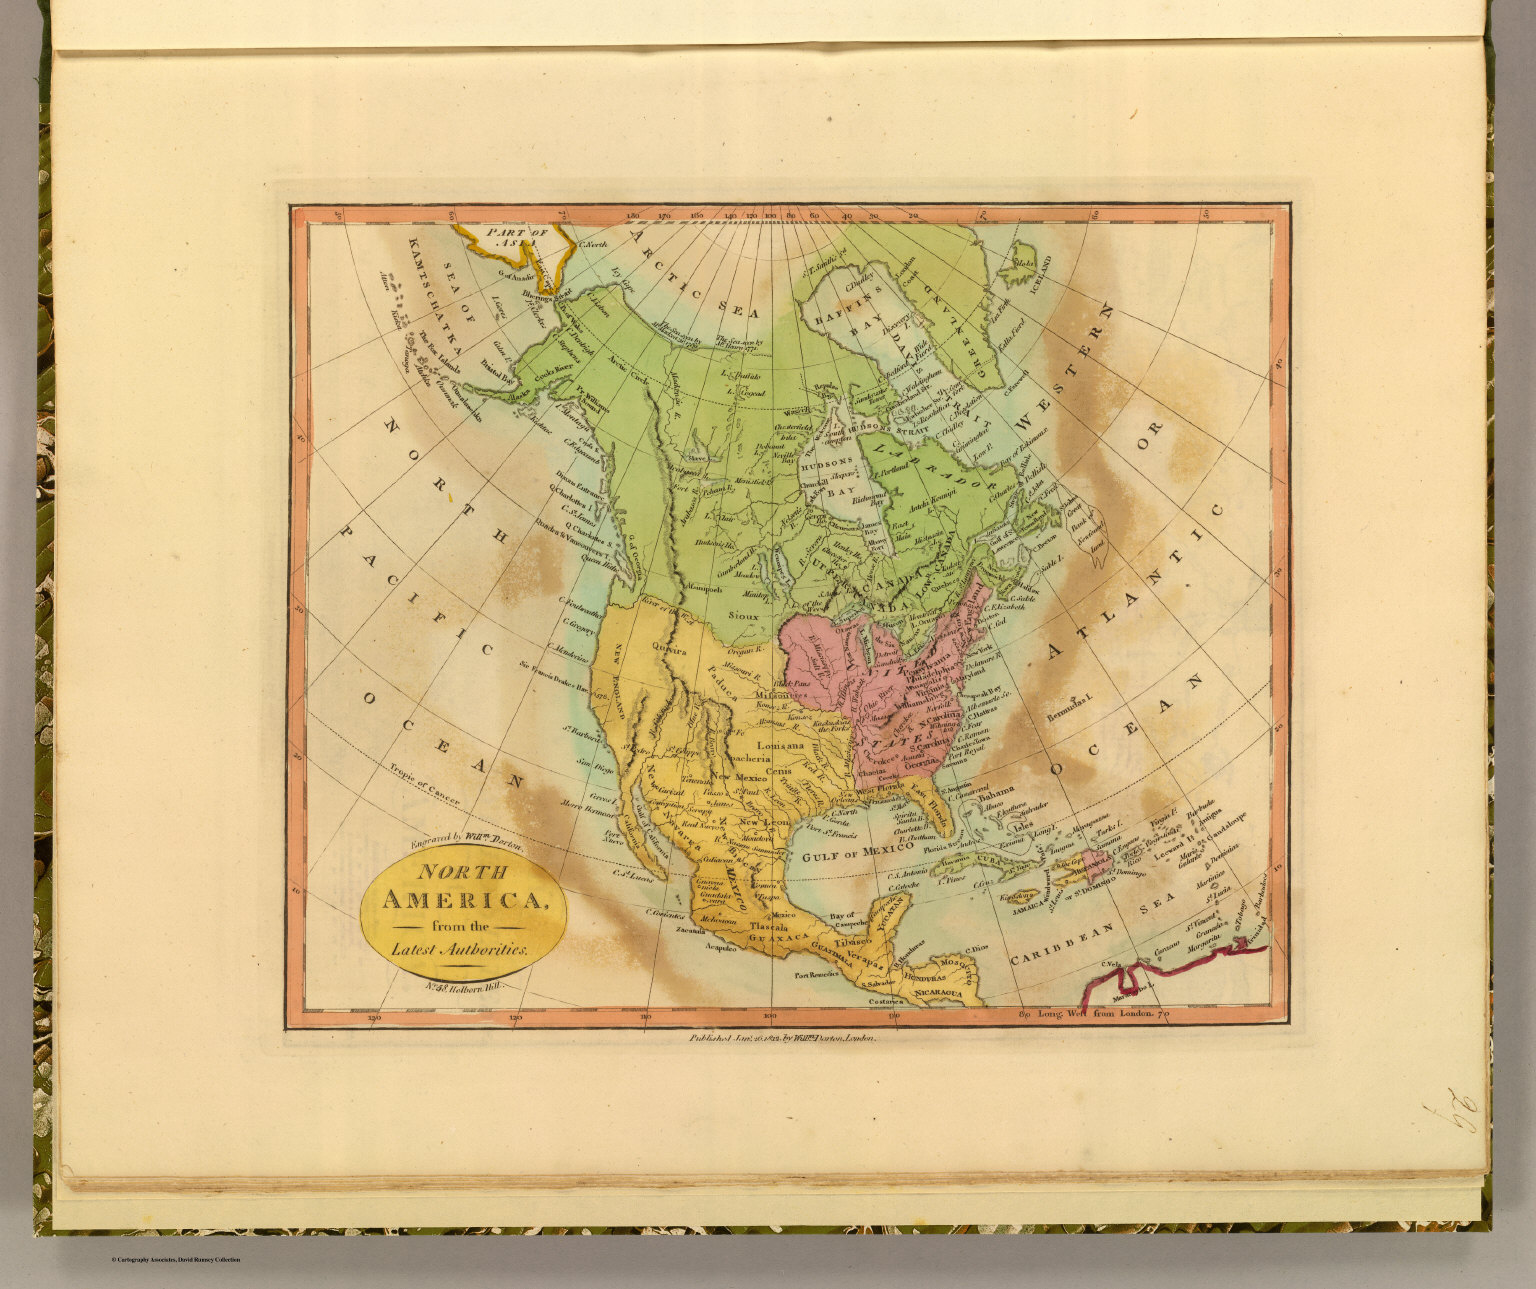 North America David Rumsey Historical Map Collection 6631